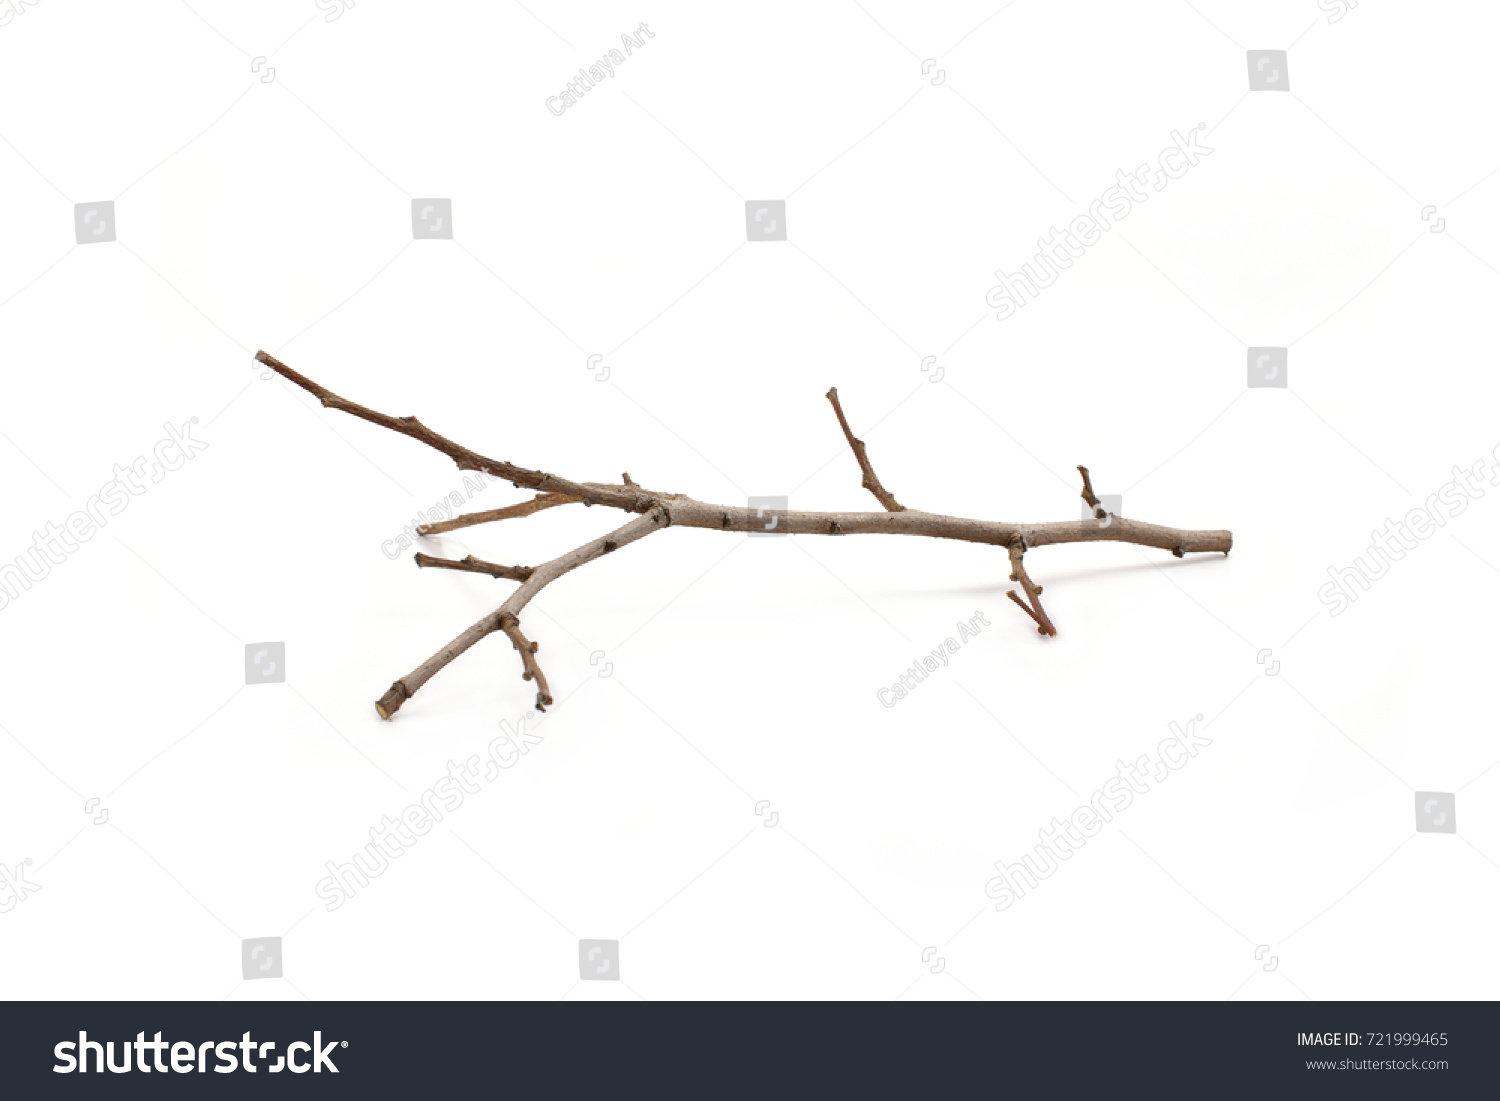 Dry branches on white wood. #721999465